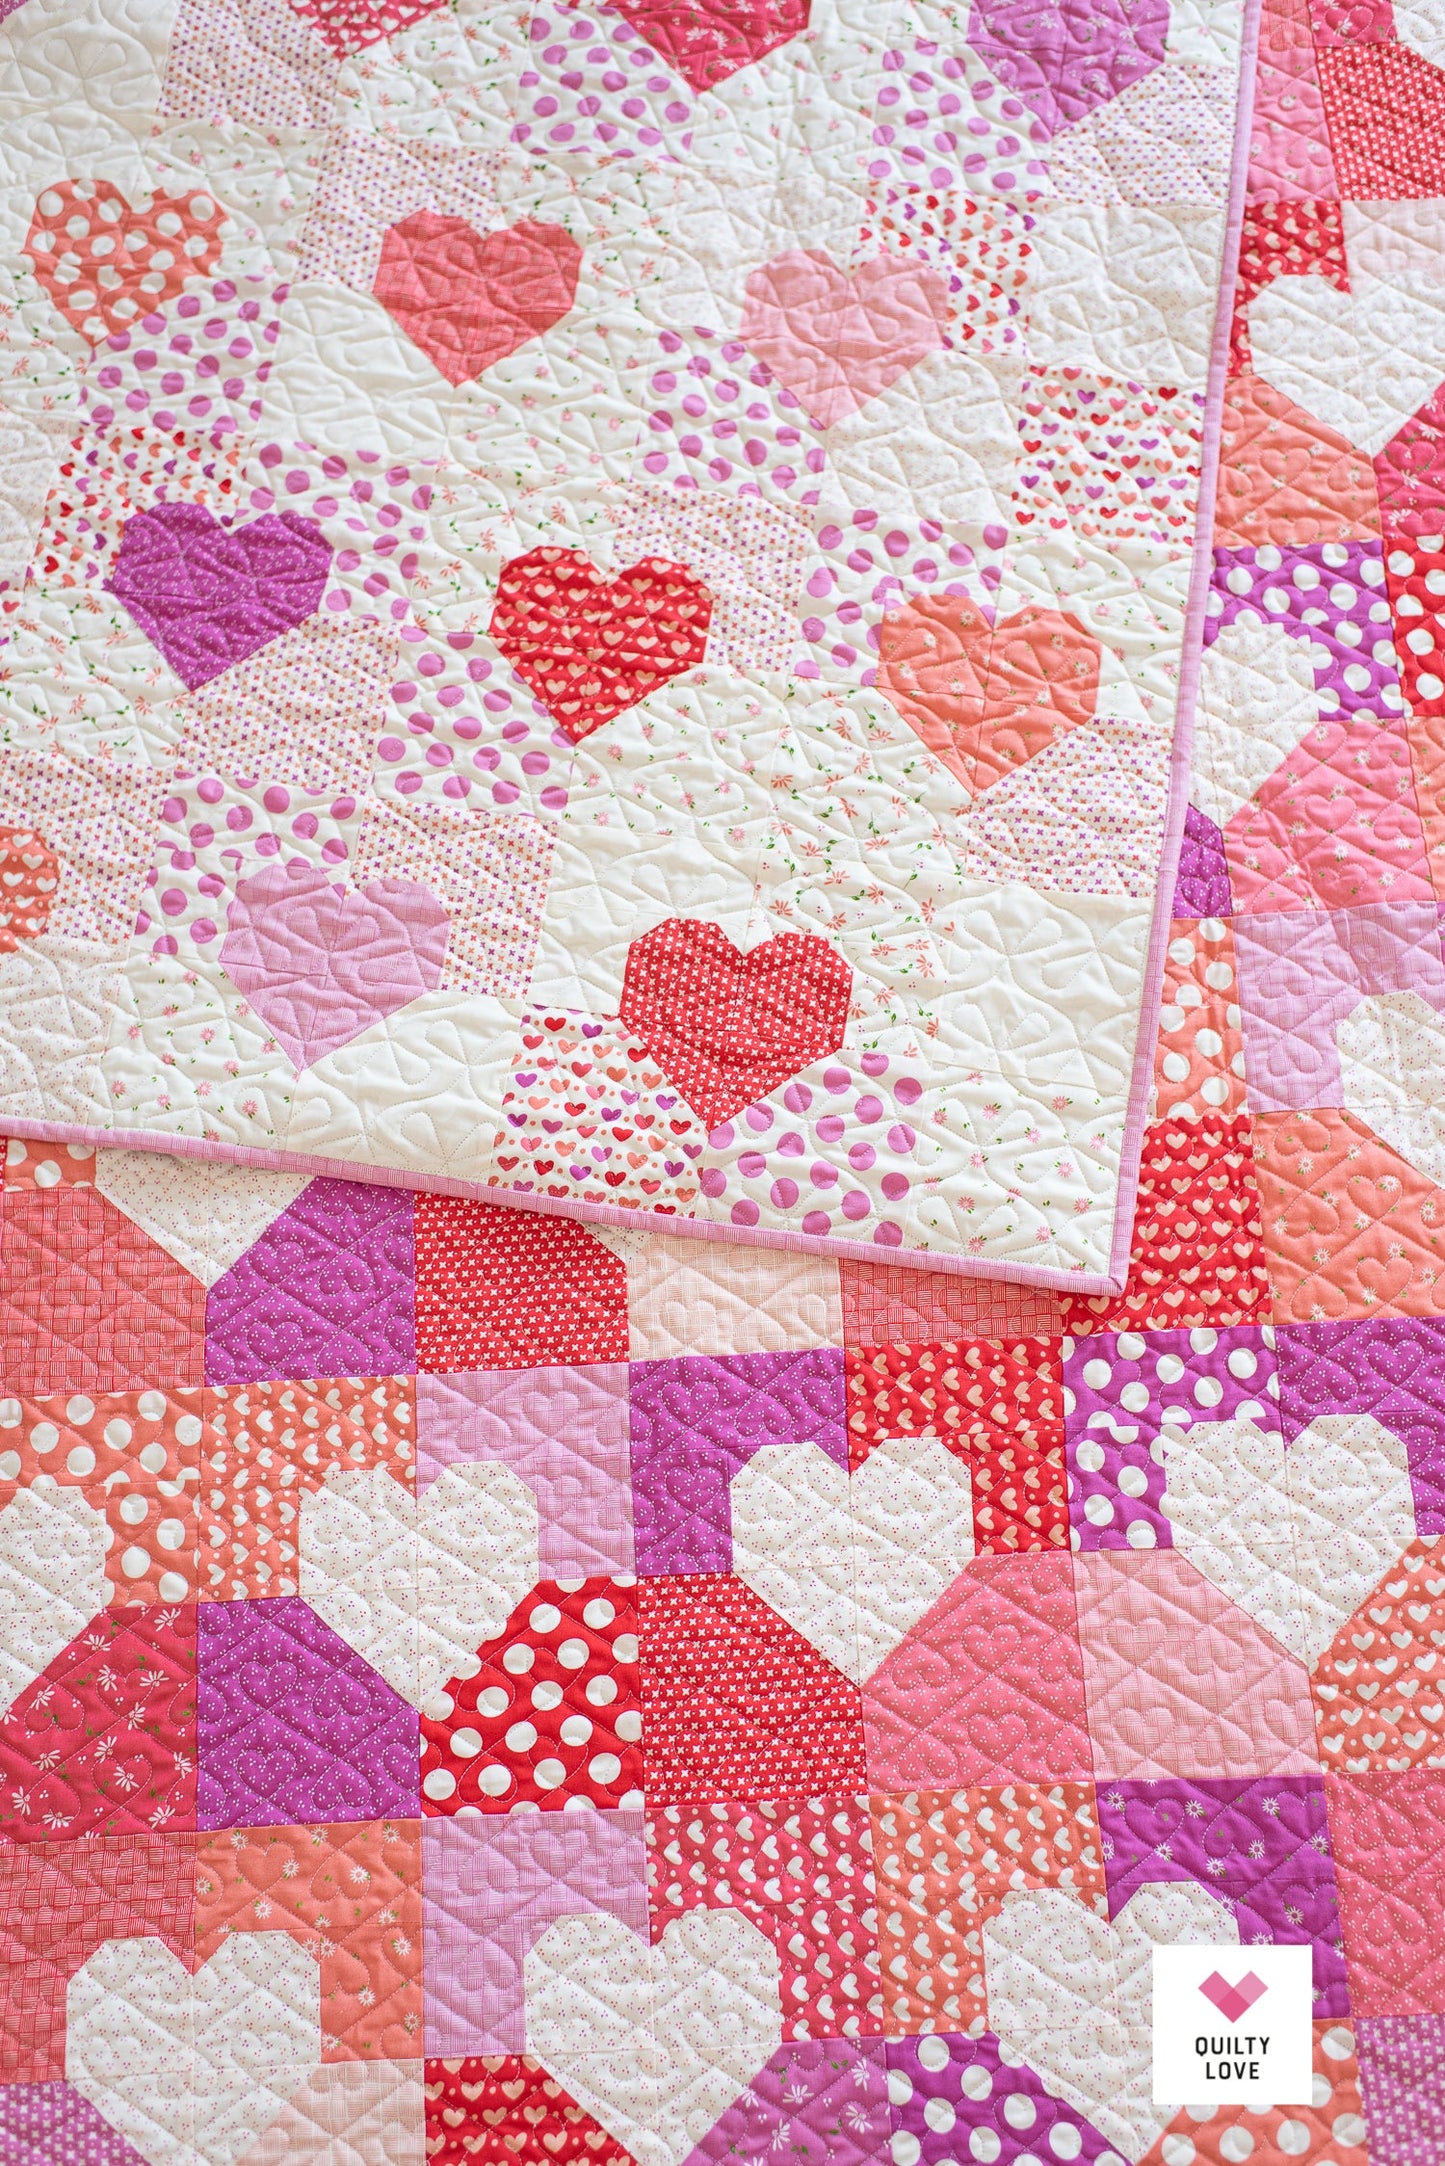 Patchwork Hearts PRINTED Quilt Pattern